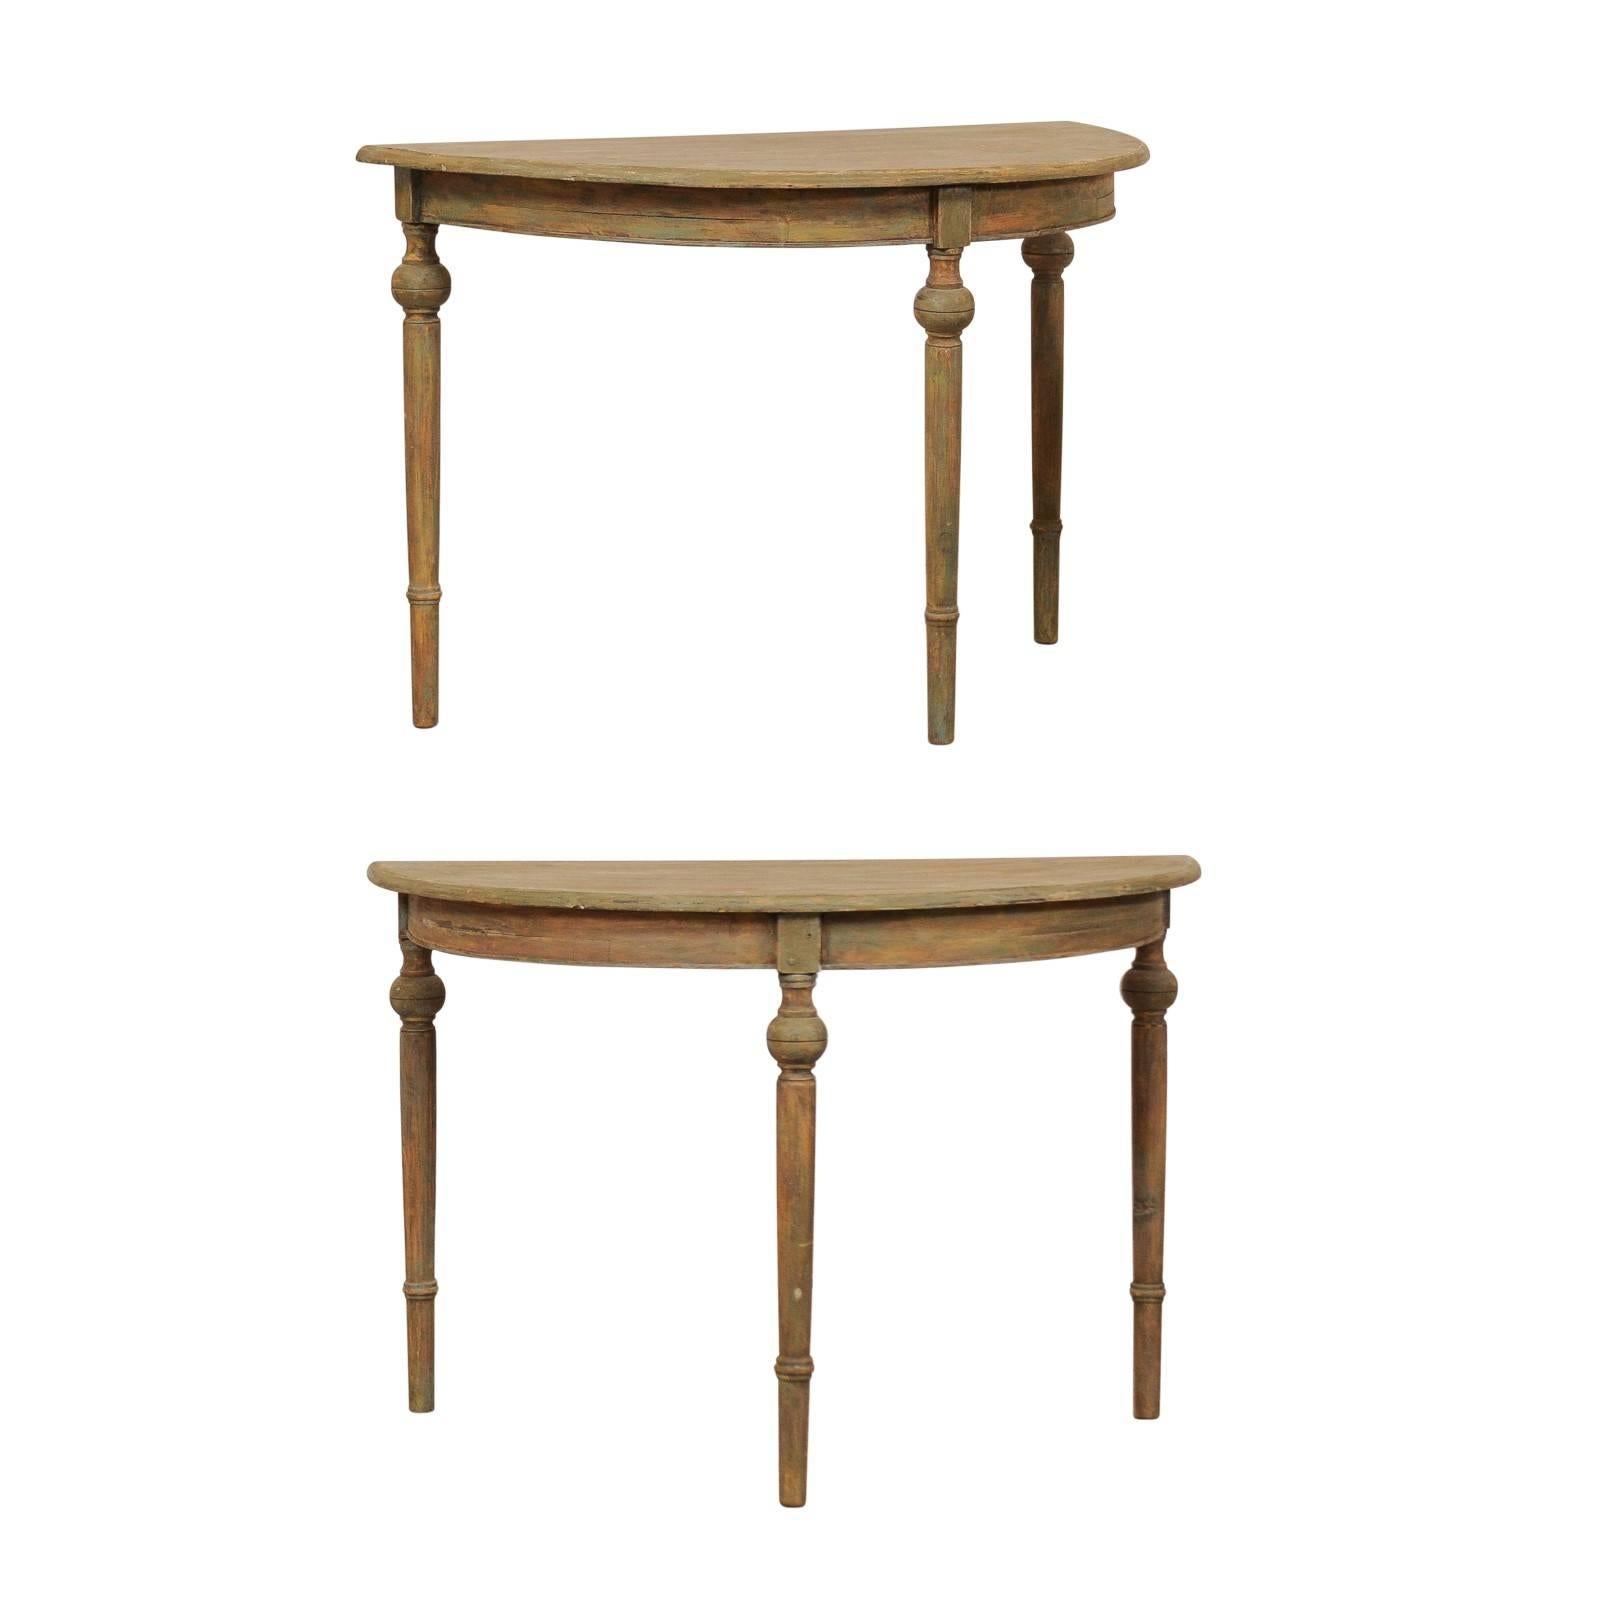 Pair of 19th Century Swedish Painted Wood Demilune Tables in Warm Sage Hues